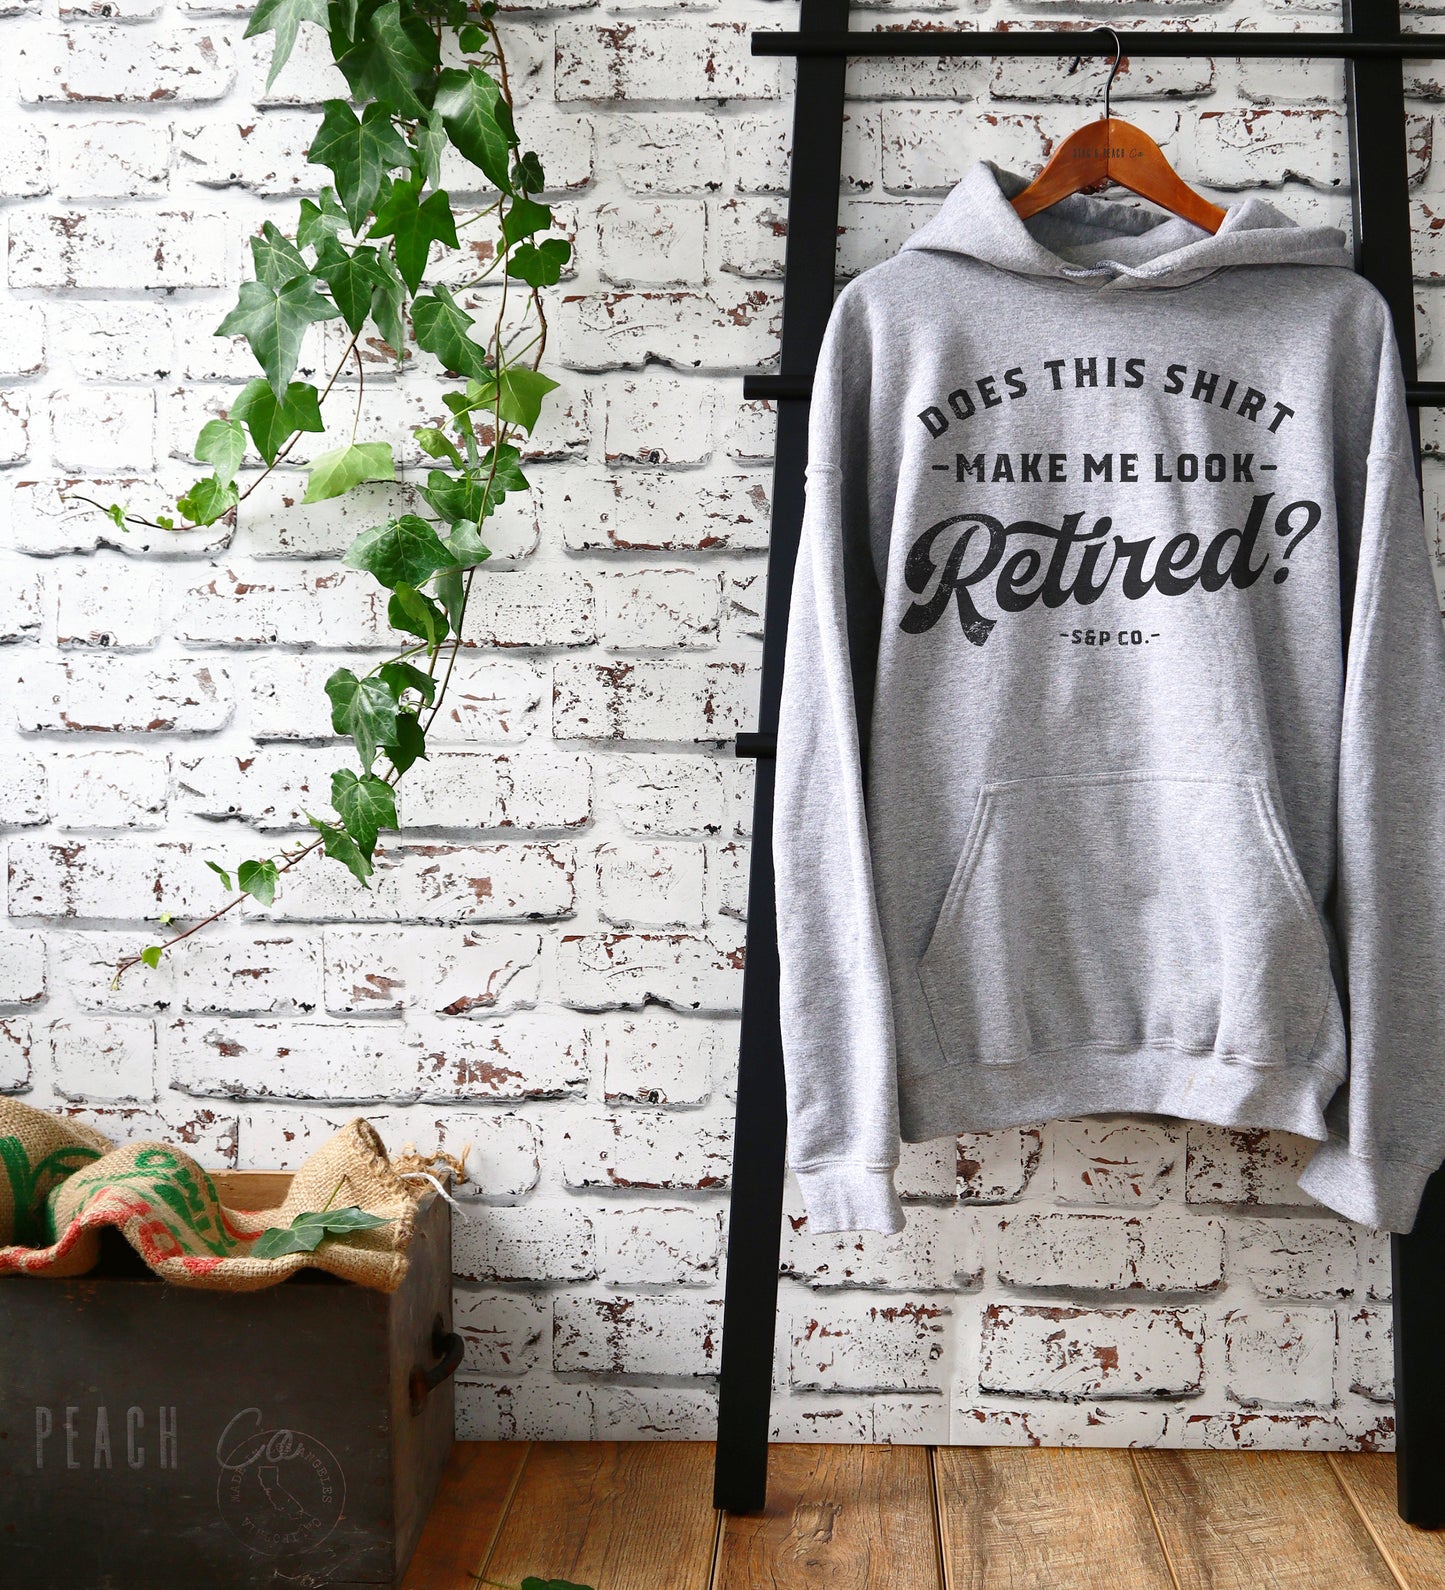 Retirement Unisex Hoodie - Does This Shirt Make Me Look Retired? Retireee Gift, Coworker Retirement Party, Leaving Gift, Retiring Outfit